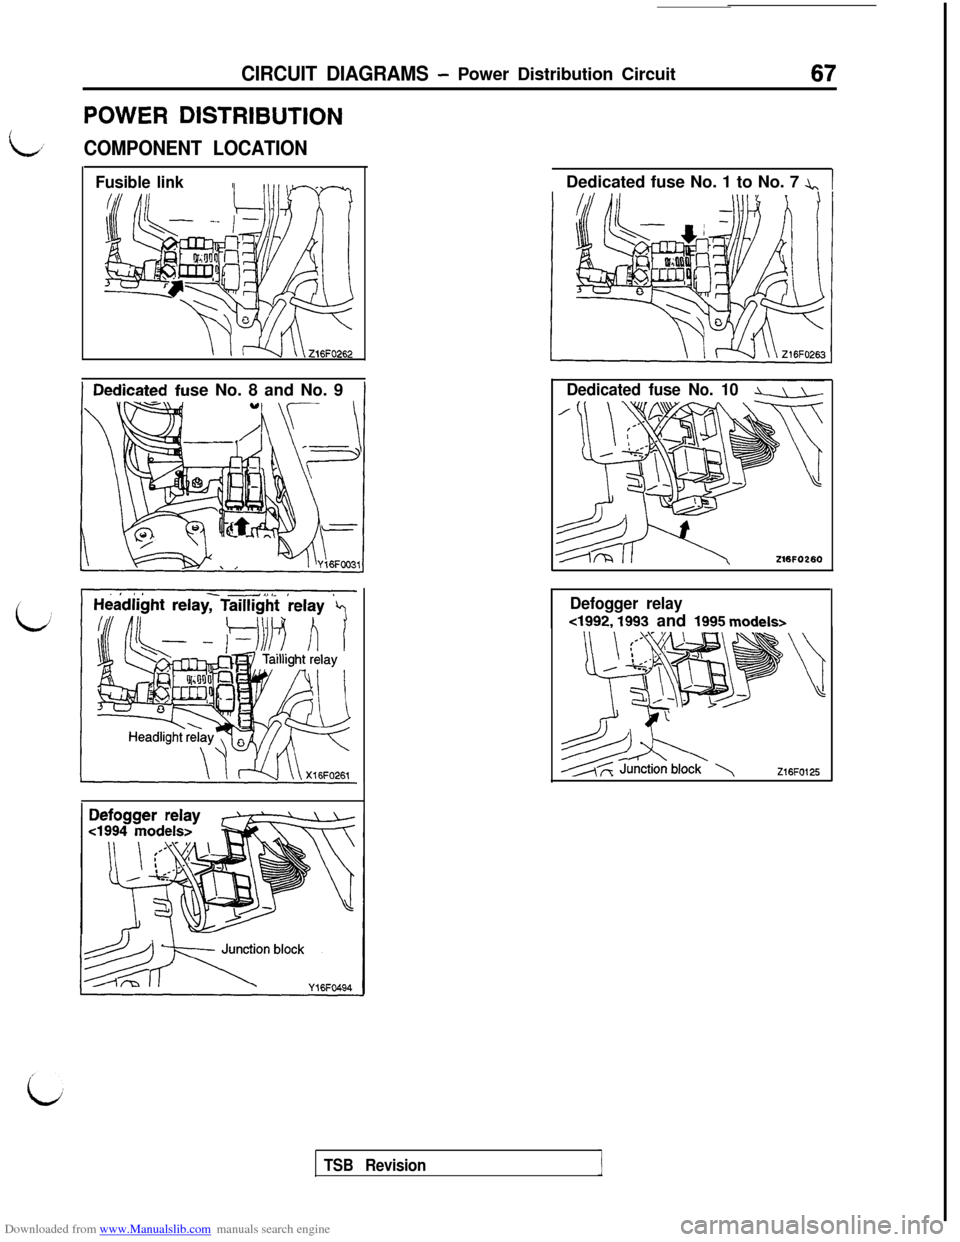 MITSUBISHI 3000GT 1995 2.G Repair Manual Downloaded from www.Manualslib.com manuals search engine CIRCUIT DIAGRAMS - Power Distribution Circuit67
POWER DISTRIBUTION
L,’COMPONENT LOCATION
Fusible linkse No. 8 and No. 9Dedicated fuse No. 1 t